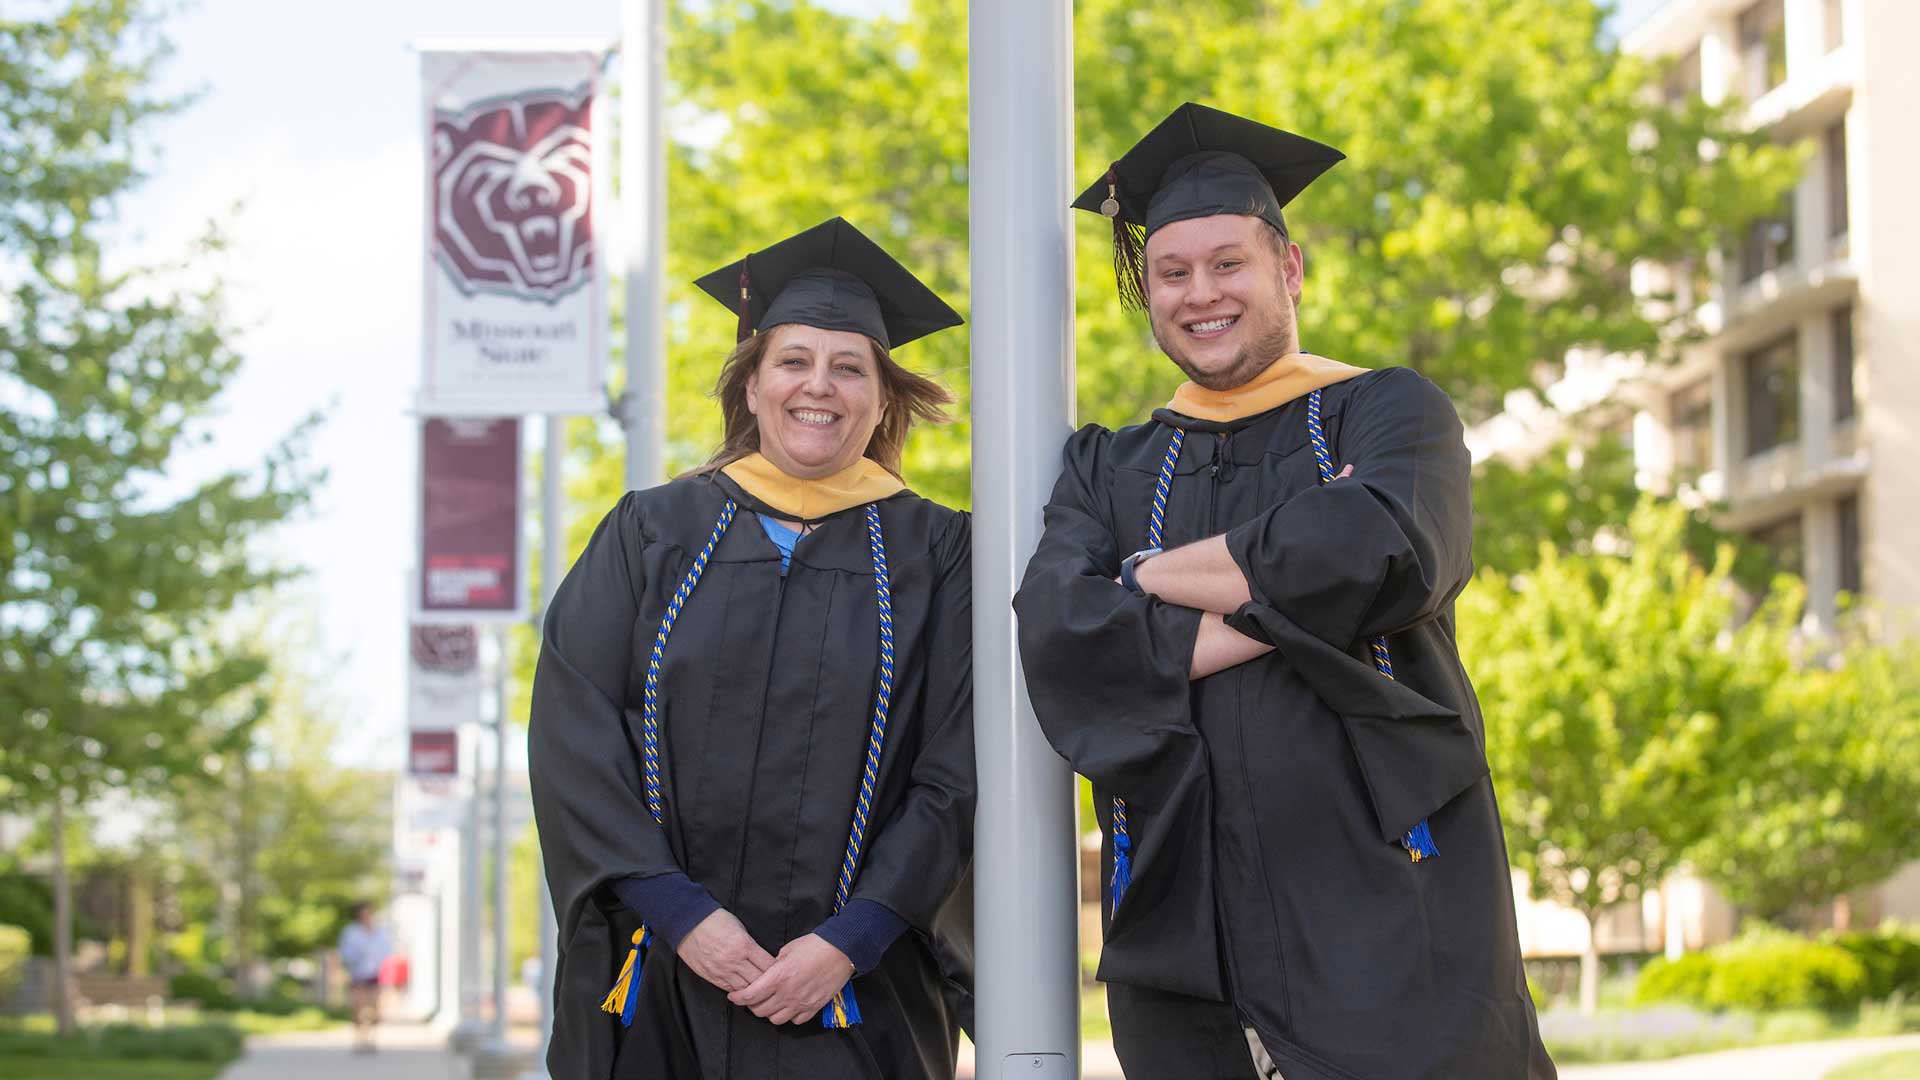 Jayma and Ethan Porter standing in their graduation gowns on campus